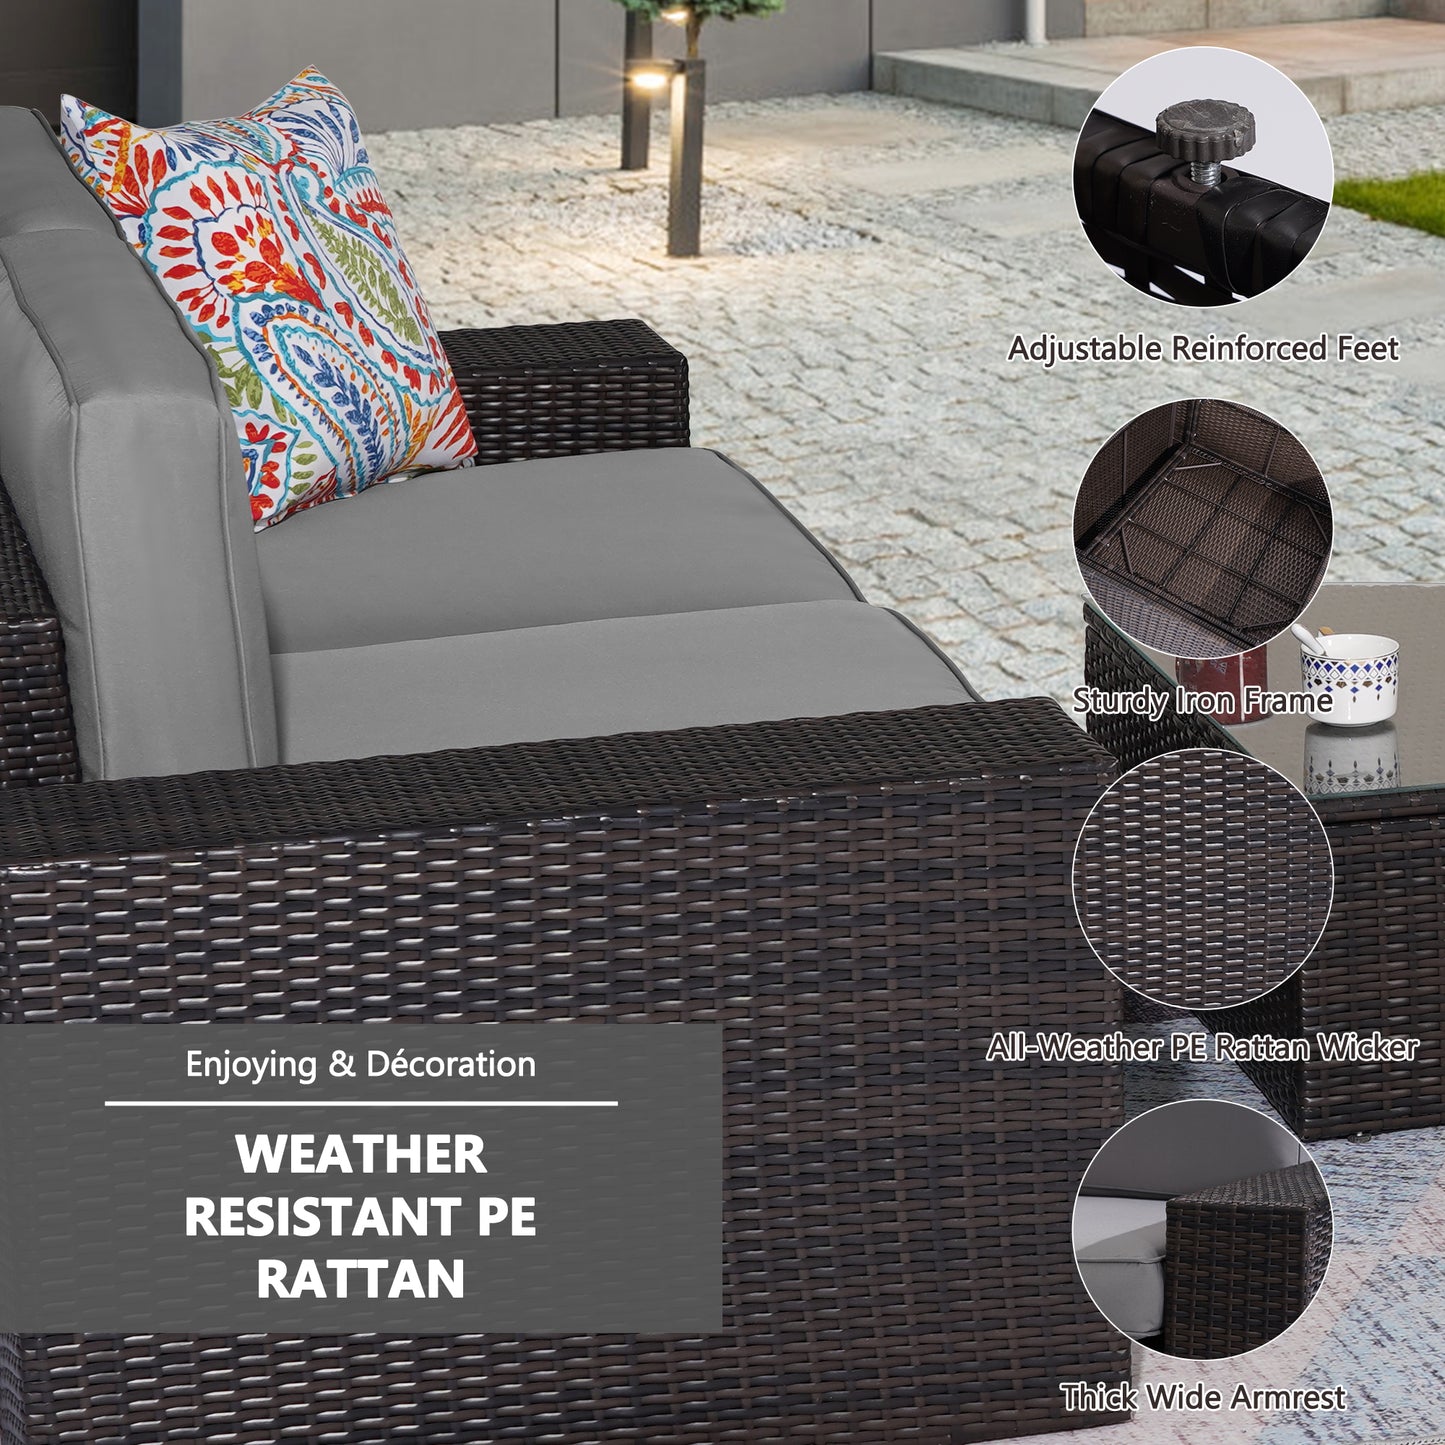 Outdoor Patio Furniture Sets, 6-Piece Furniture Patio Sectional Sofa Couch Patio Conversation Set, All-Weather Rattan Wicker Patio Sofa for Pool, Deck and Backyard, Grey